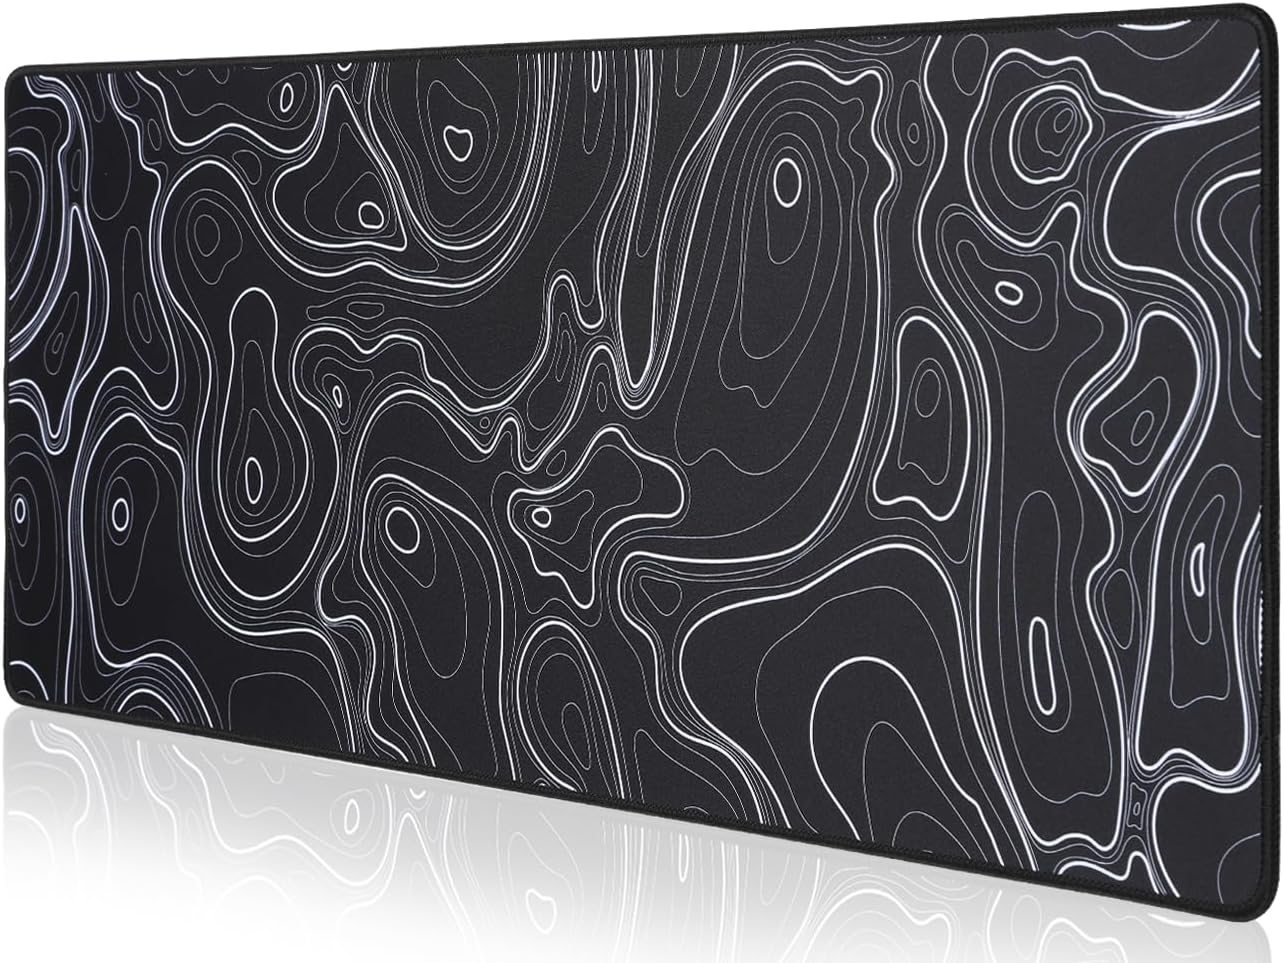 Topographic Map Waterproof Mouse Pad - Extended Contour Mouse Mat for Home and Office, Large Gaming Mousepad Laptop Keyboard Mat with Non-Slip Rubber Base, Stitched Edges (31.50x11.81x0.12)